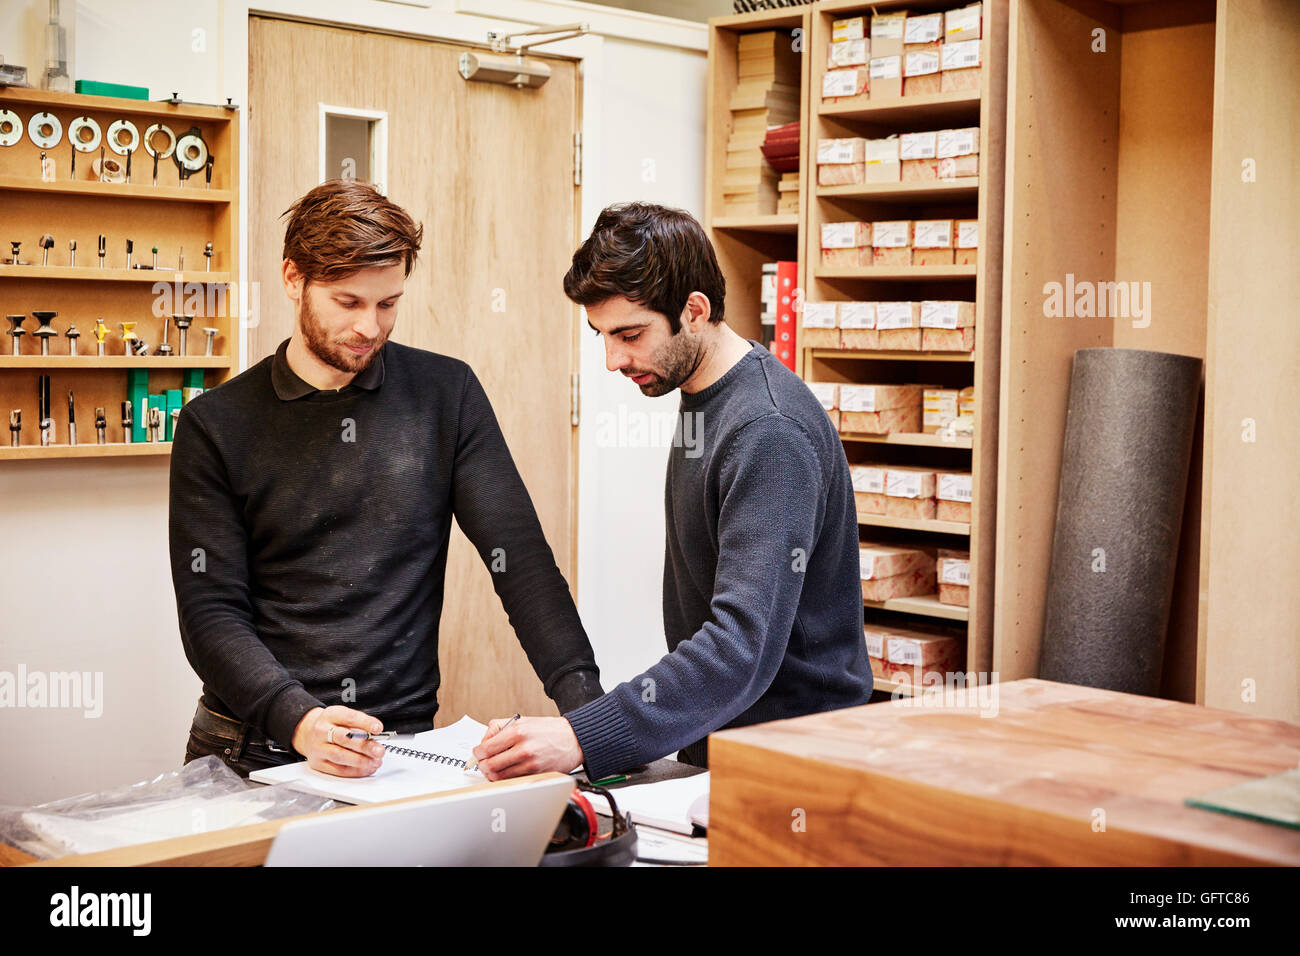 A furniture workshop ,Two people discussing a design referring to drawings Stock Photo